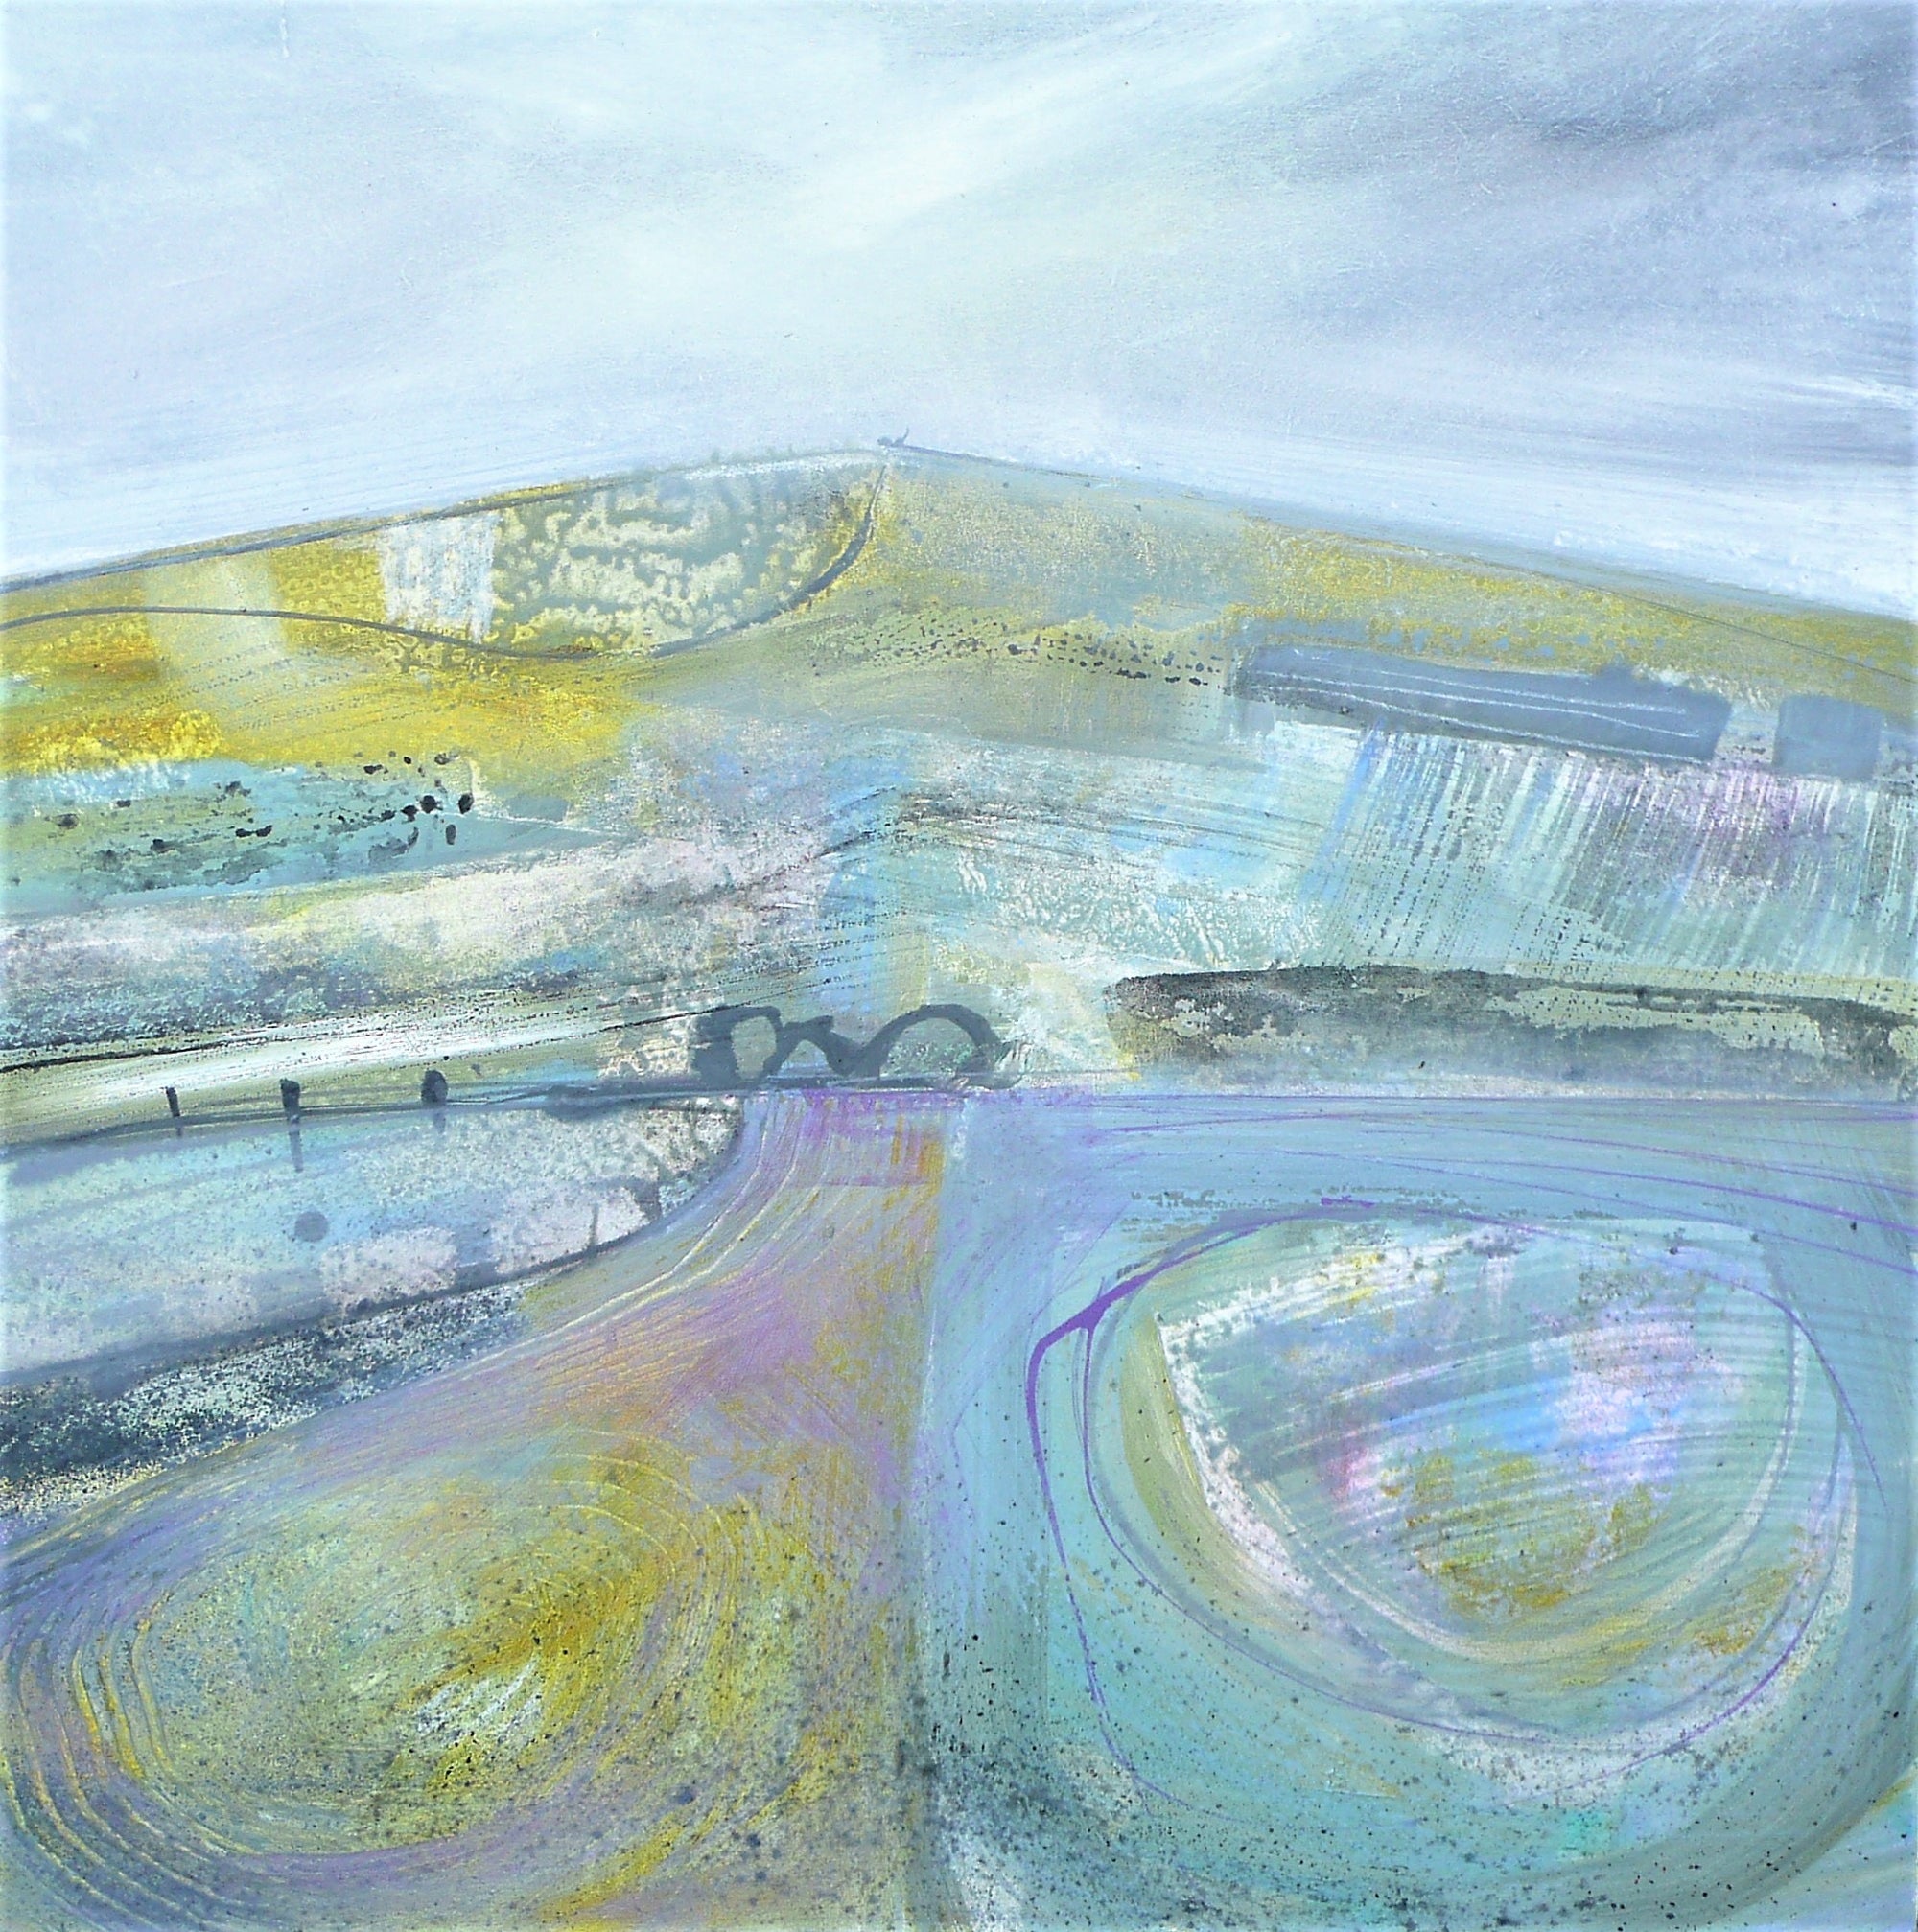 Sweet Summer Rain by Ruth Taylor, oil on board, available at Padstow Gallery, Cornwall